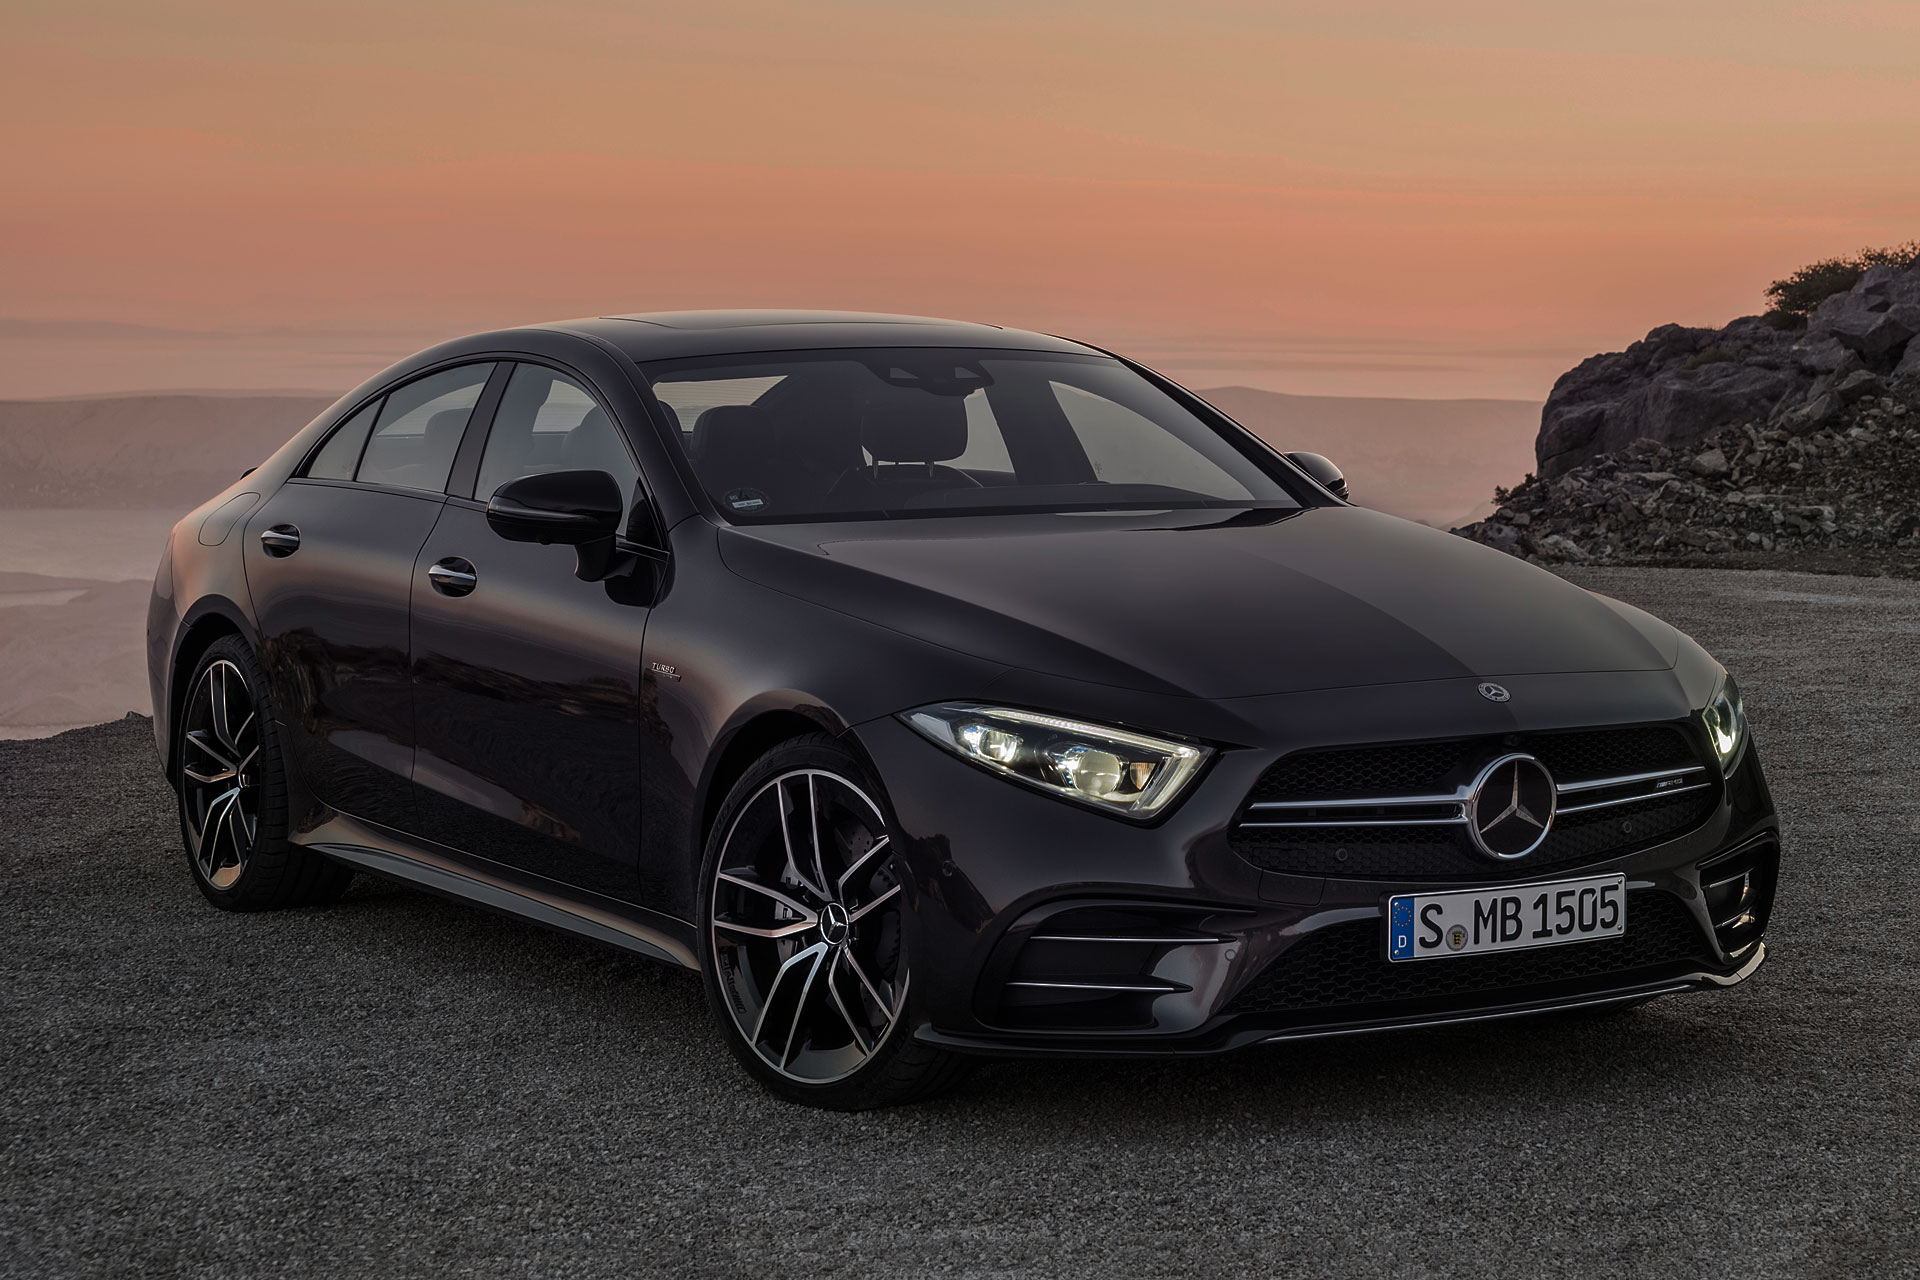 2019 Mercedes Cls Best Looking Car To Come Out In A While Water Cooler Analystforum